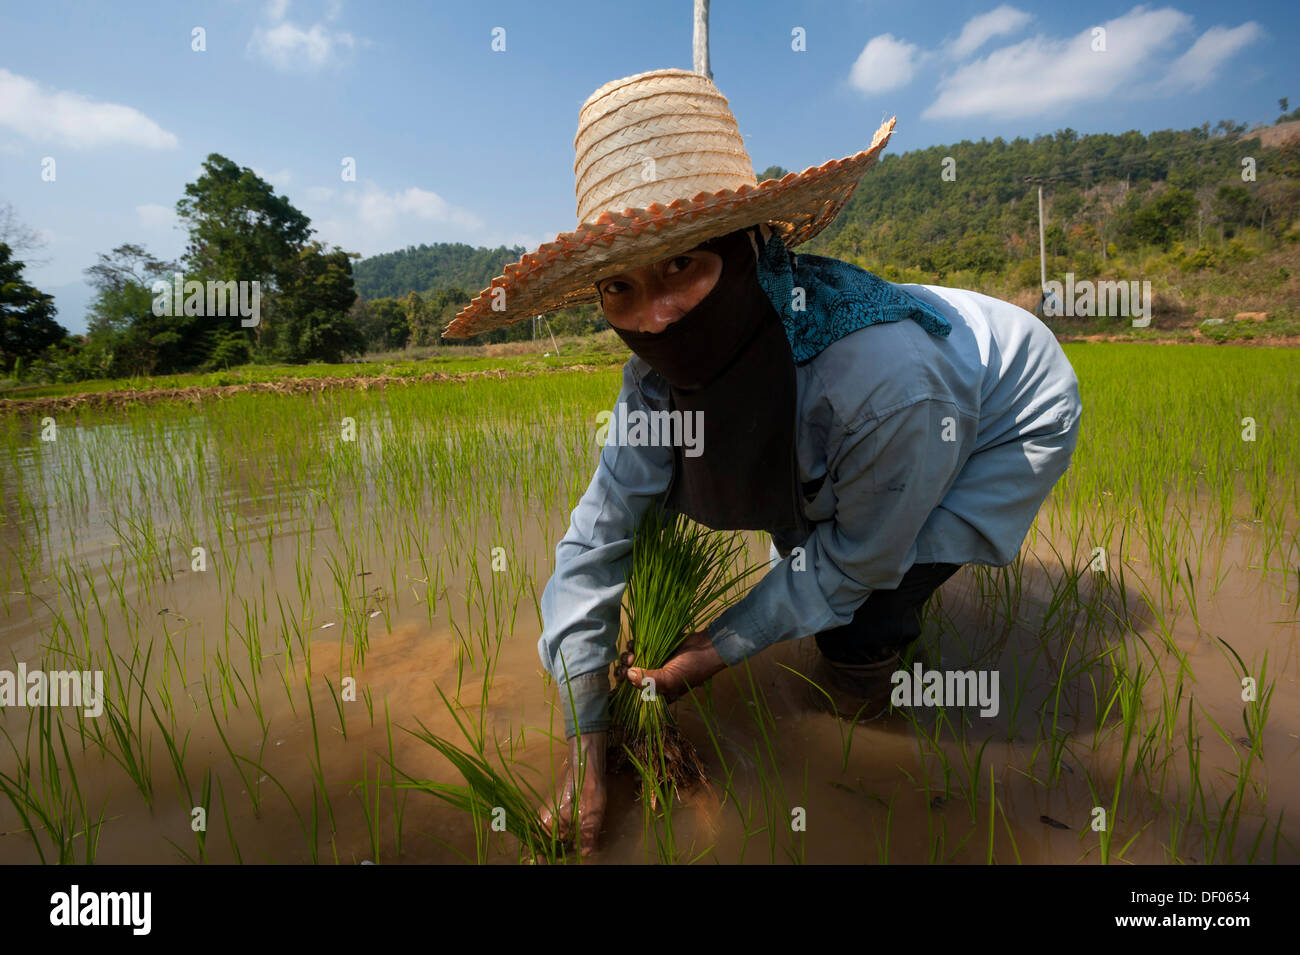 Female farmer with a hat, working in a rice paddy, rice plants in the water, rice farming, Northern Thailand, Thailand, Asia Stock Photo